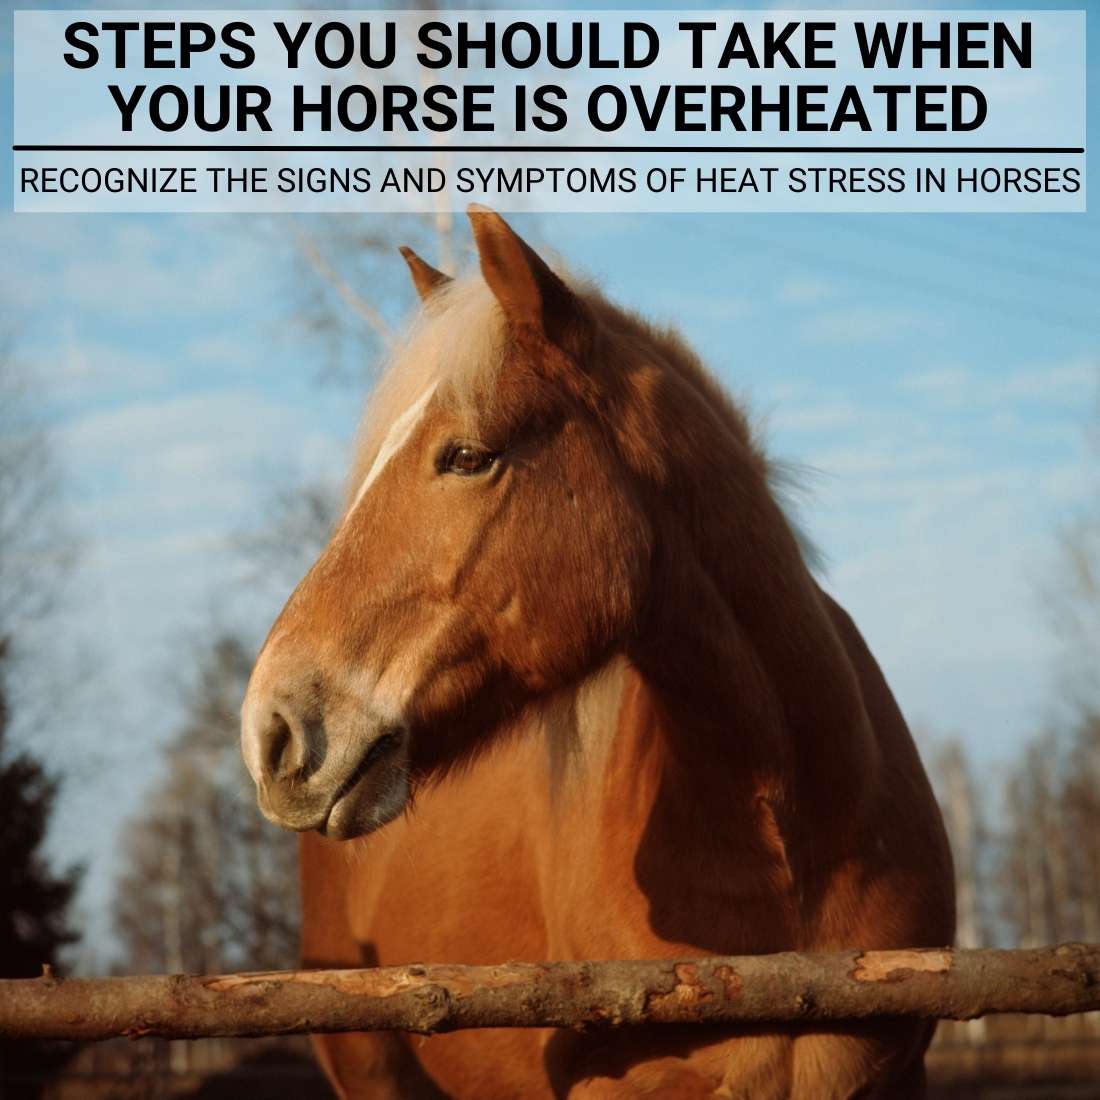 Steps You Should Take When Your Horse is Overheated